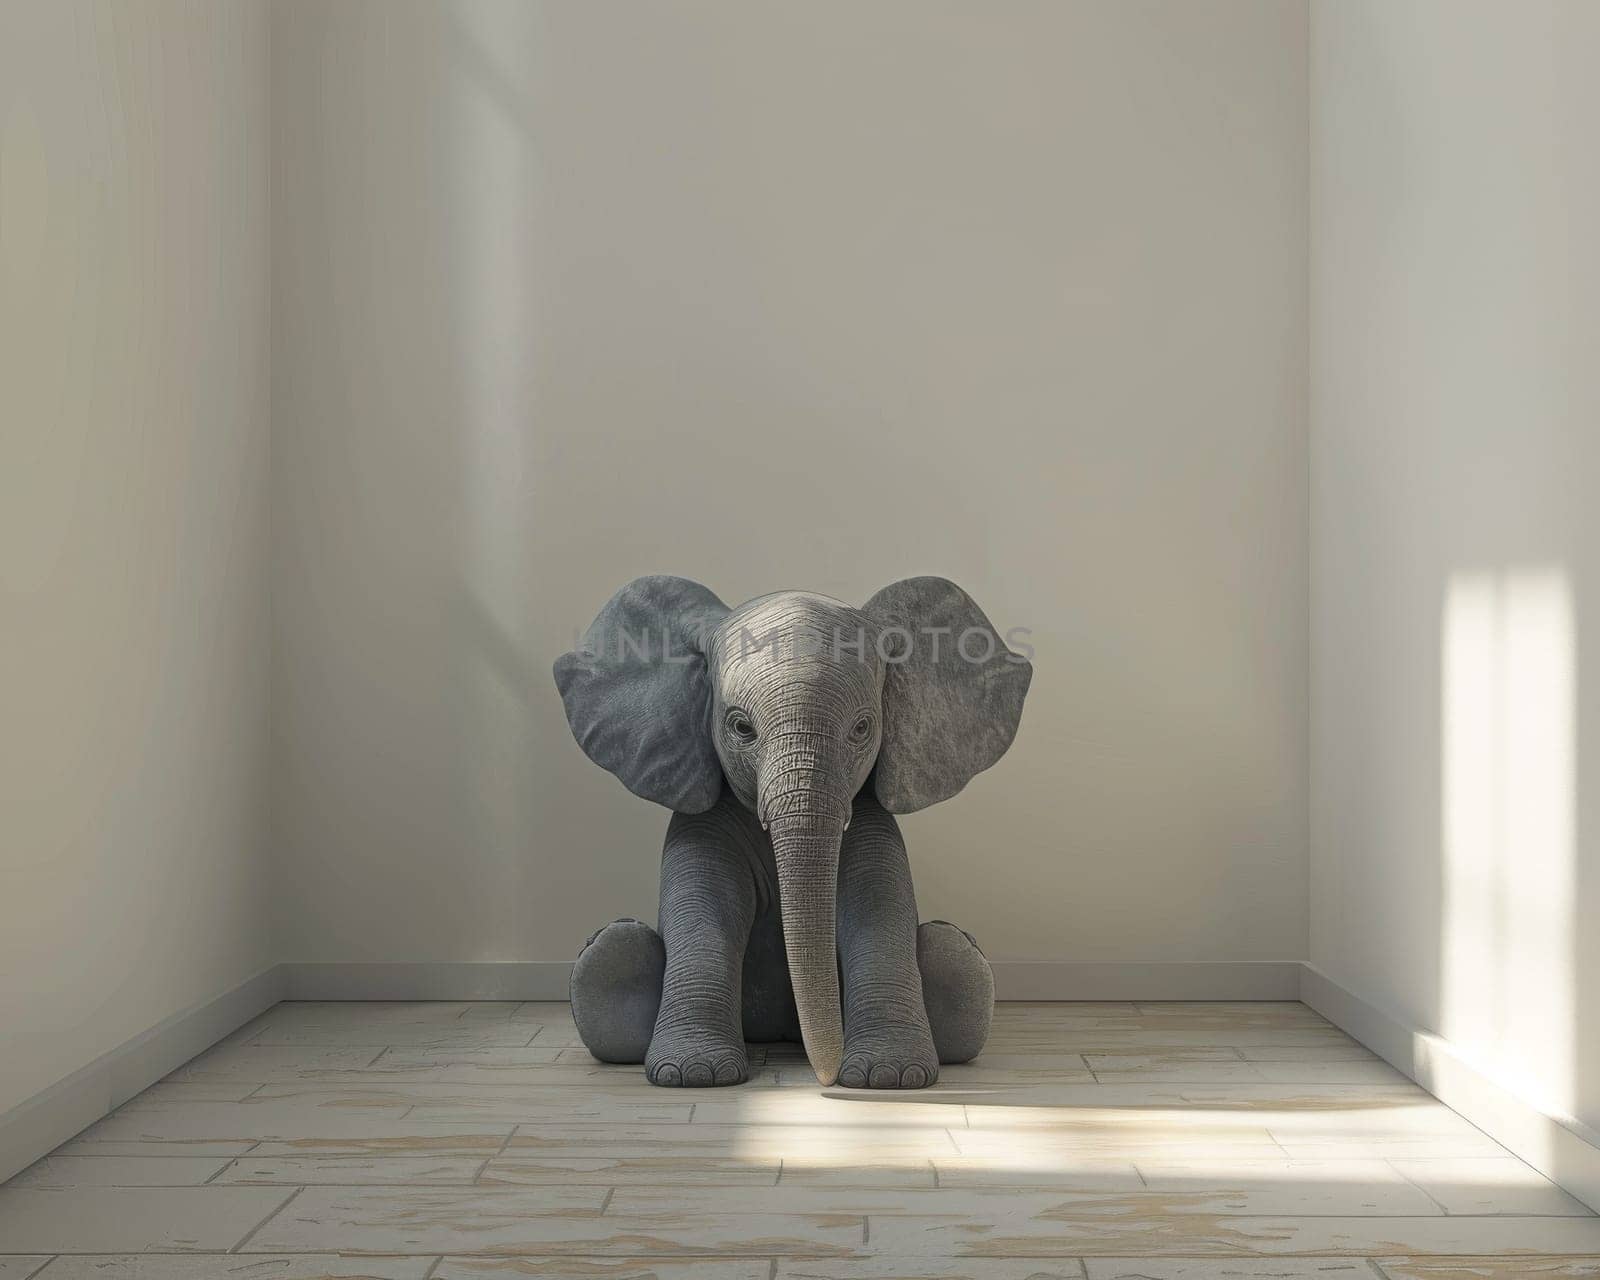 A small elephant statue is sitting in a room with white walls. The elephant is looking at the camera, and the room is empty